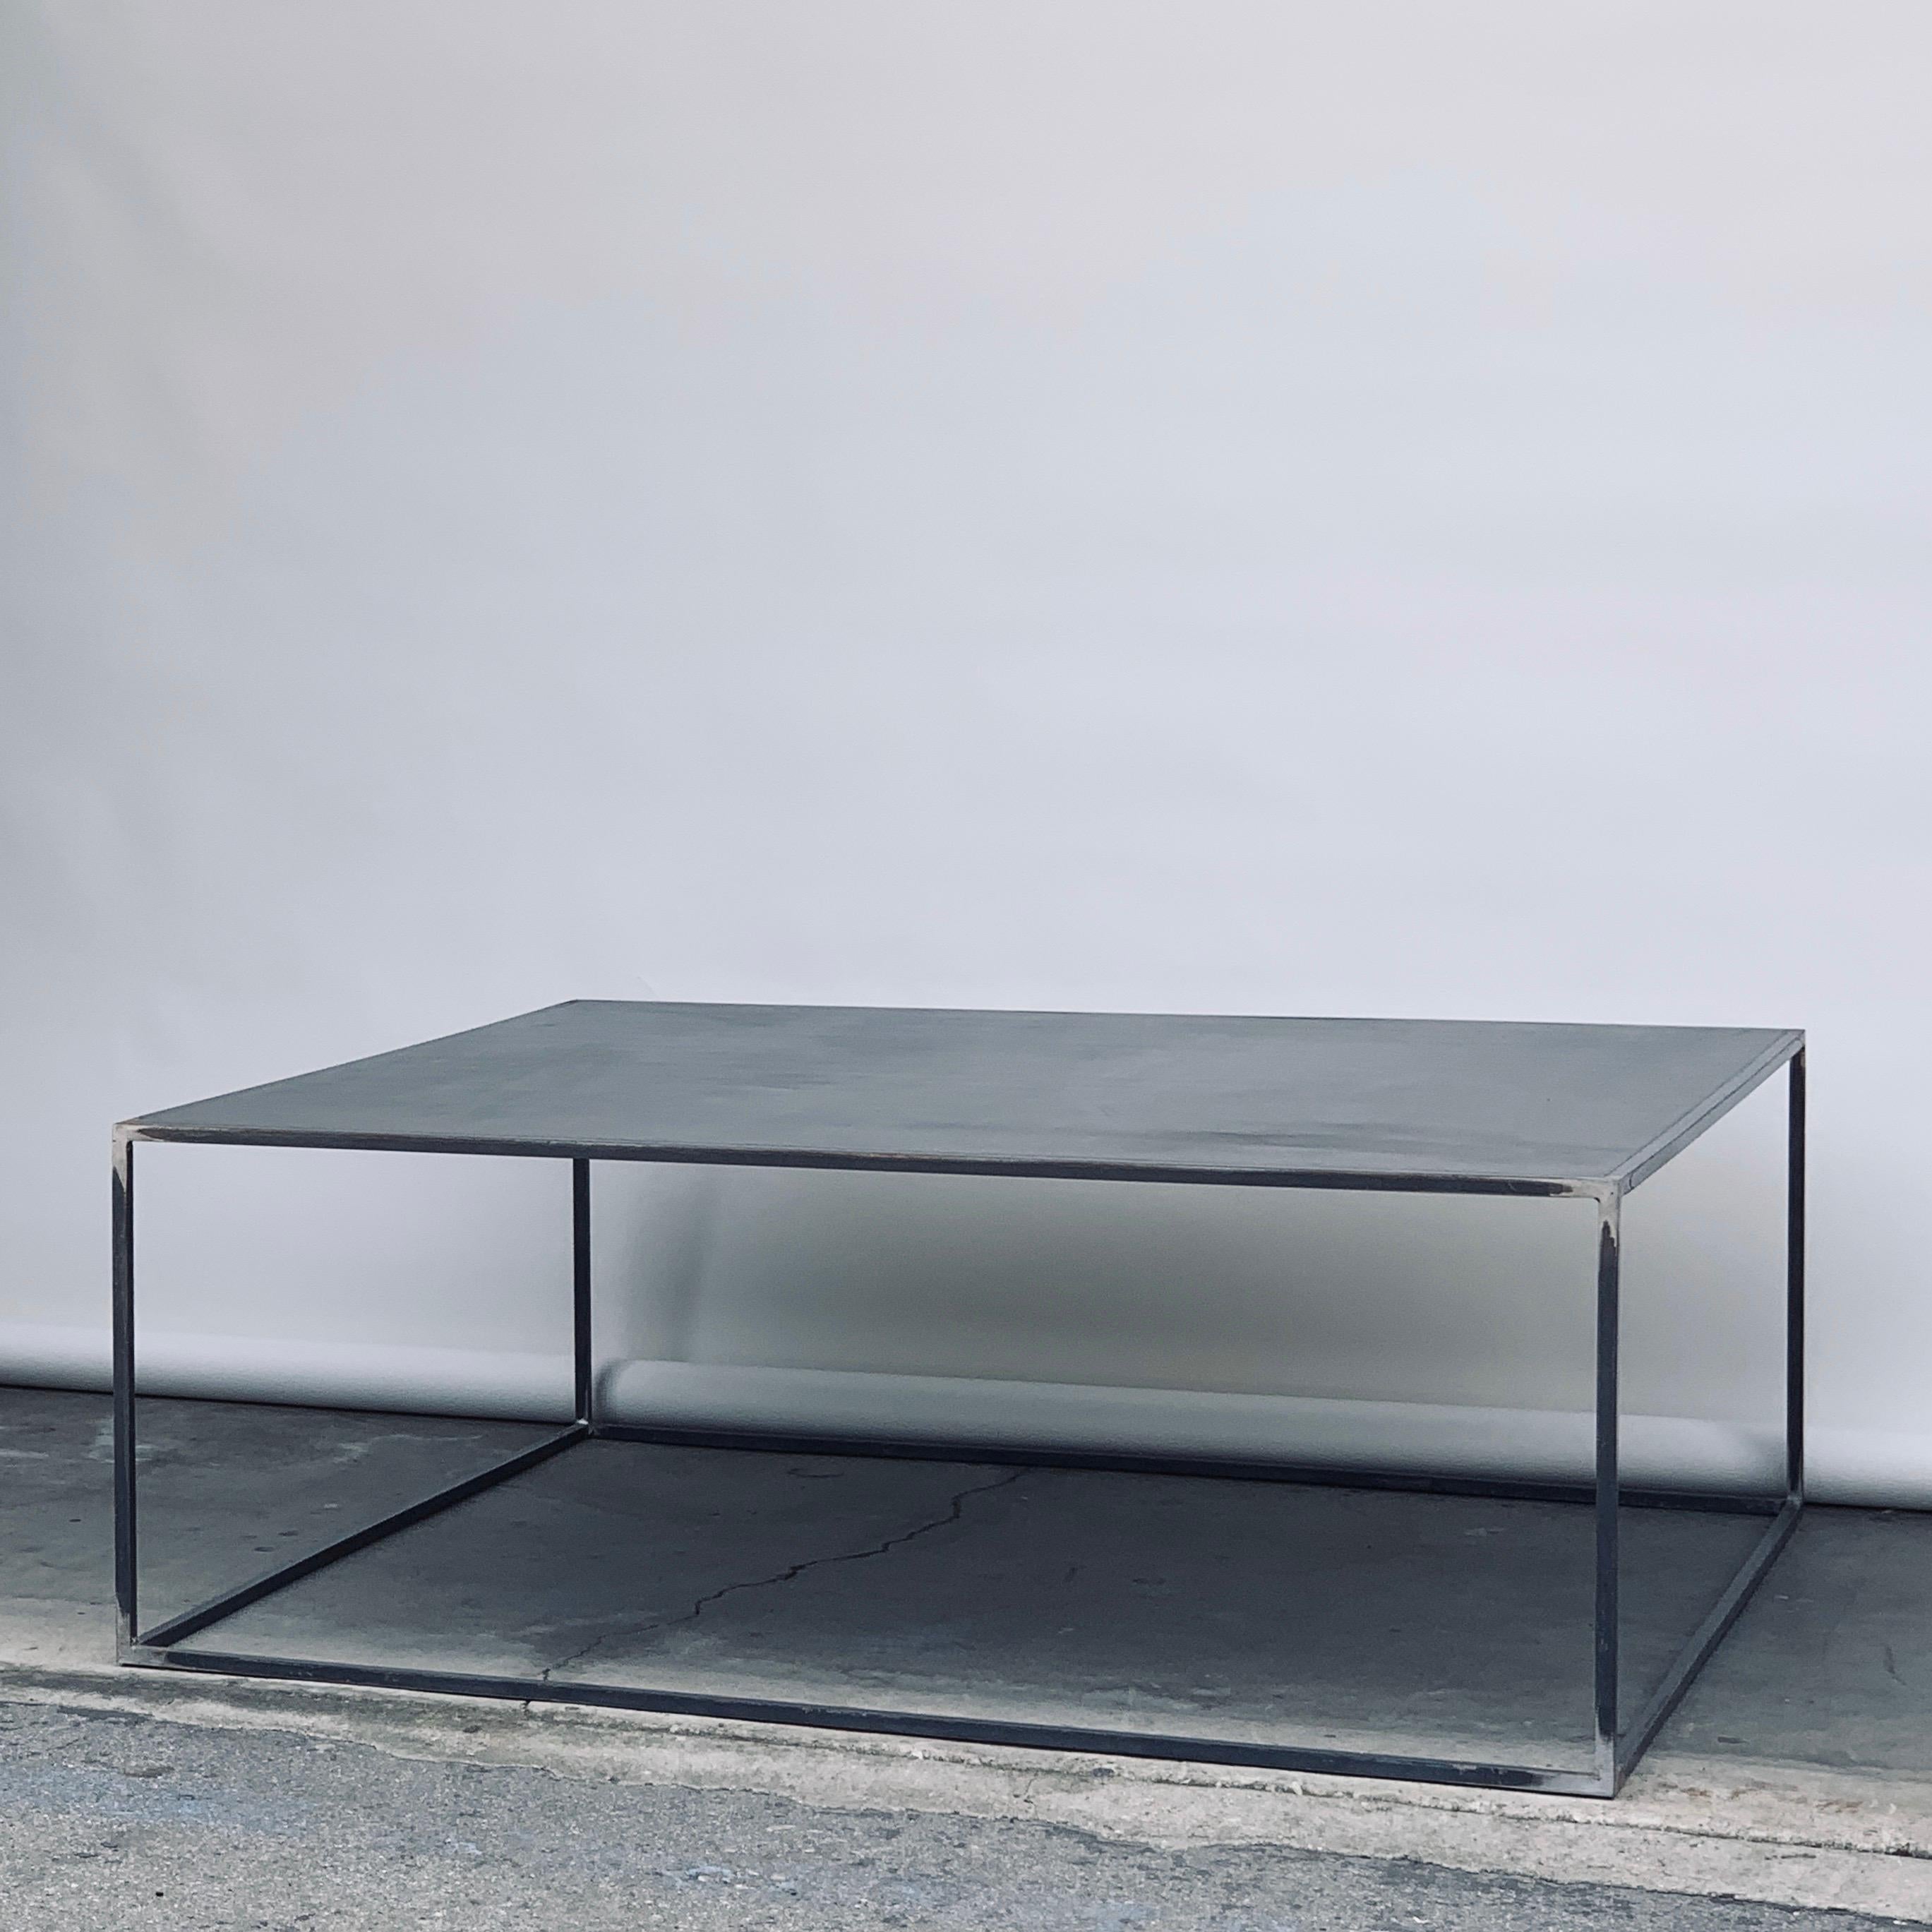 Complete Set of 'Filiforme' Minimalist Patinated Steel Living Room Tables In Good Condition For Sale In Los Angeles, CA